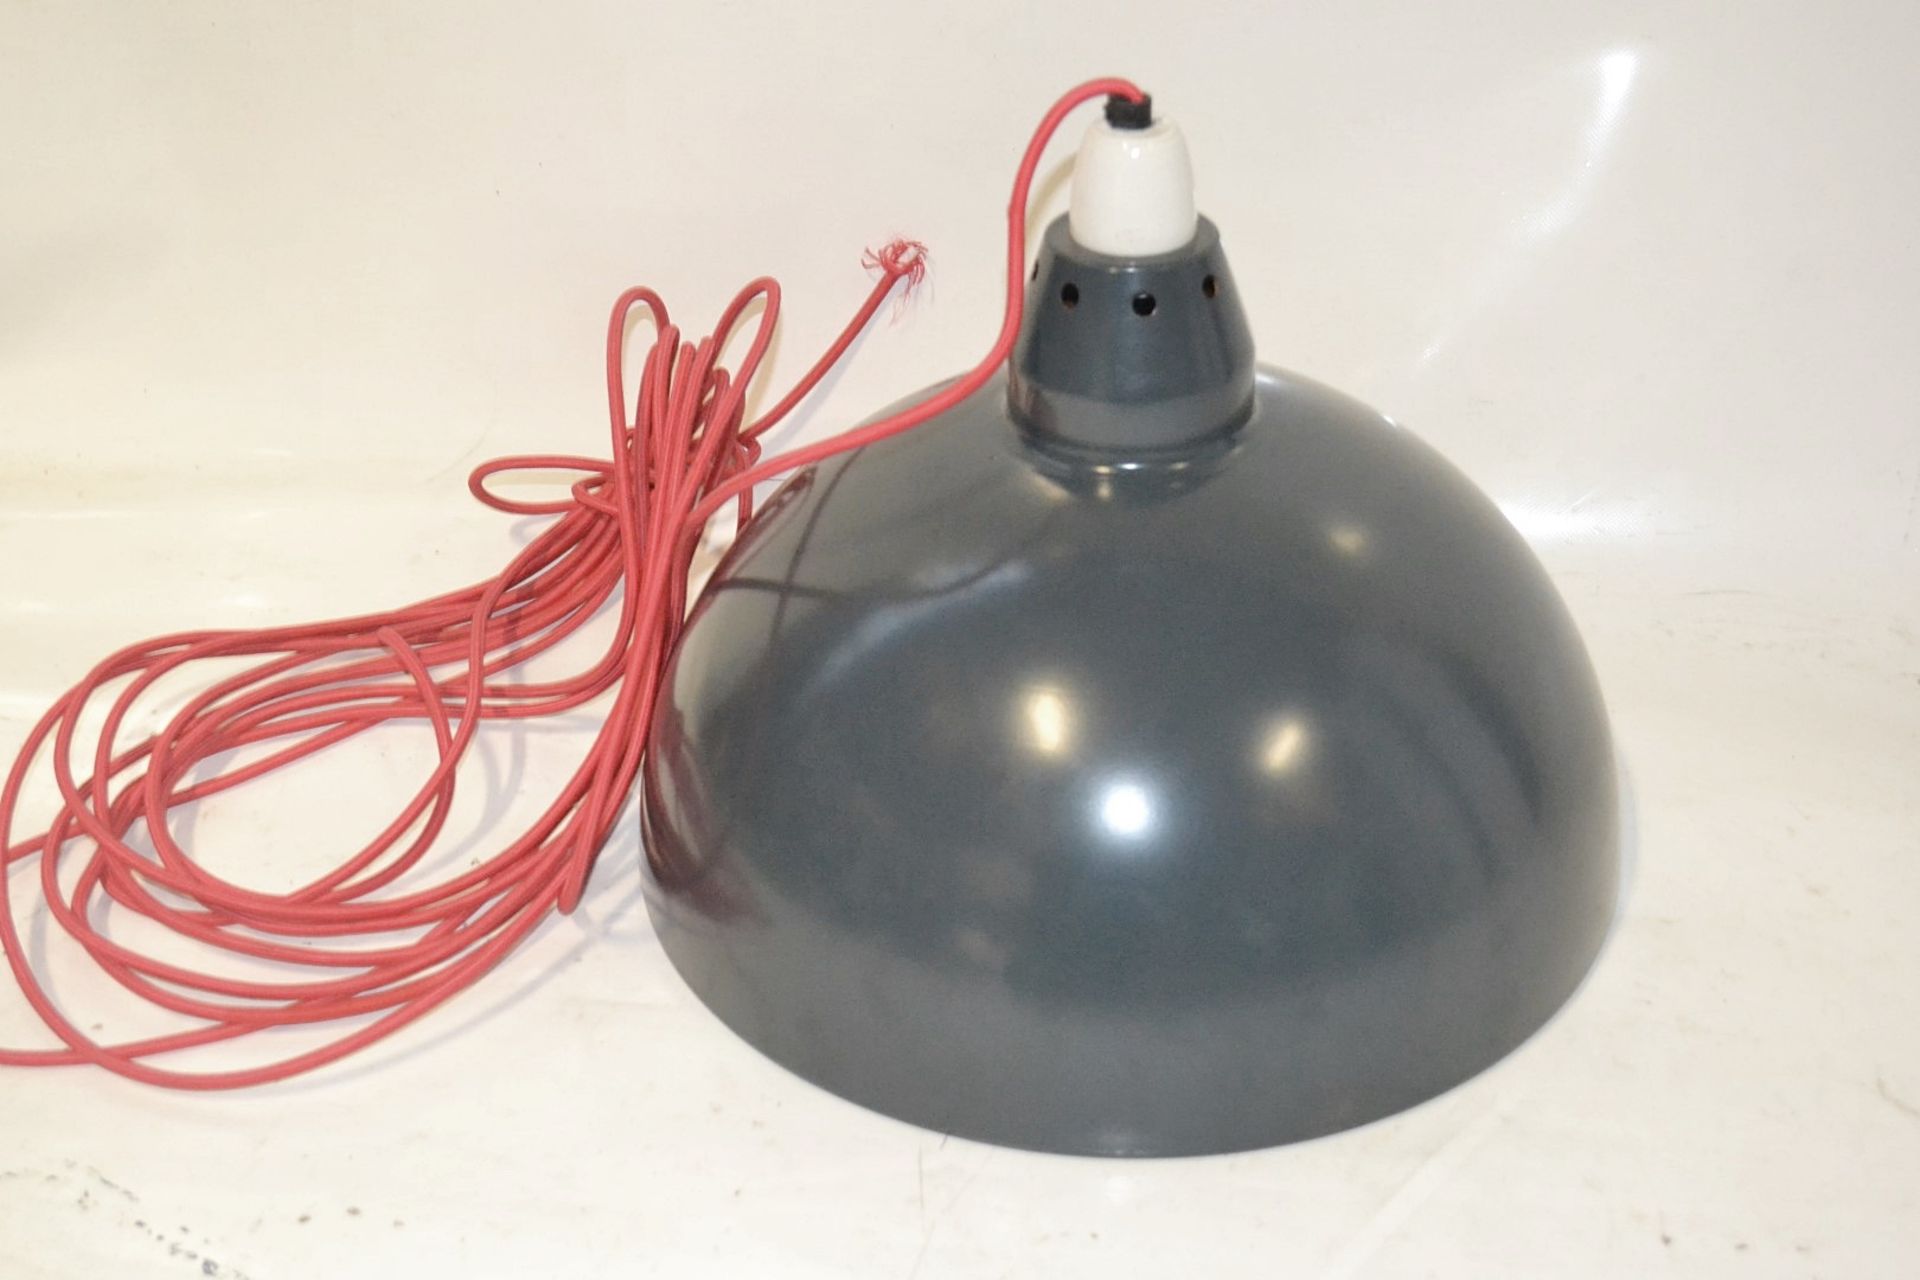 2 x Dome Pendant Ceiling Light Fittings With Bright Red Fabric Flex - CL353 - Image 3 of 5